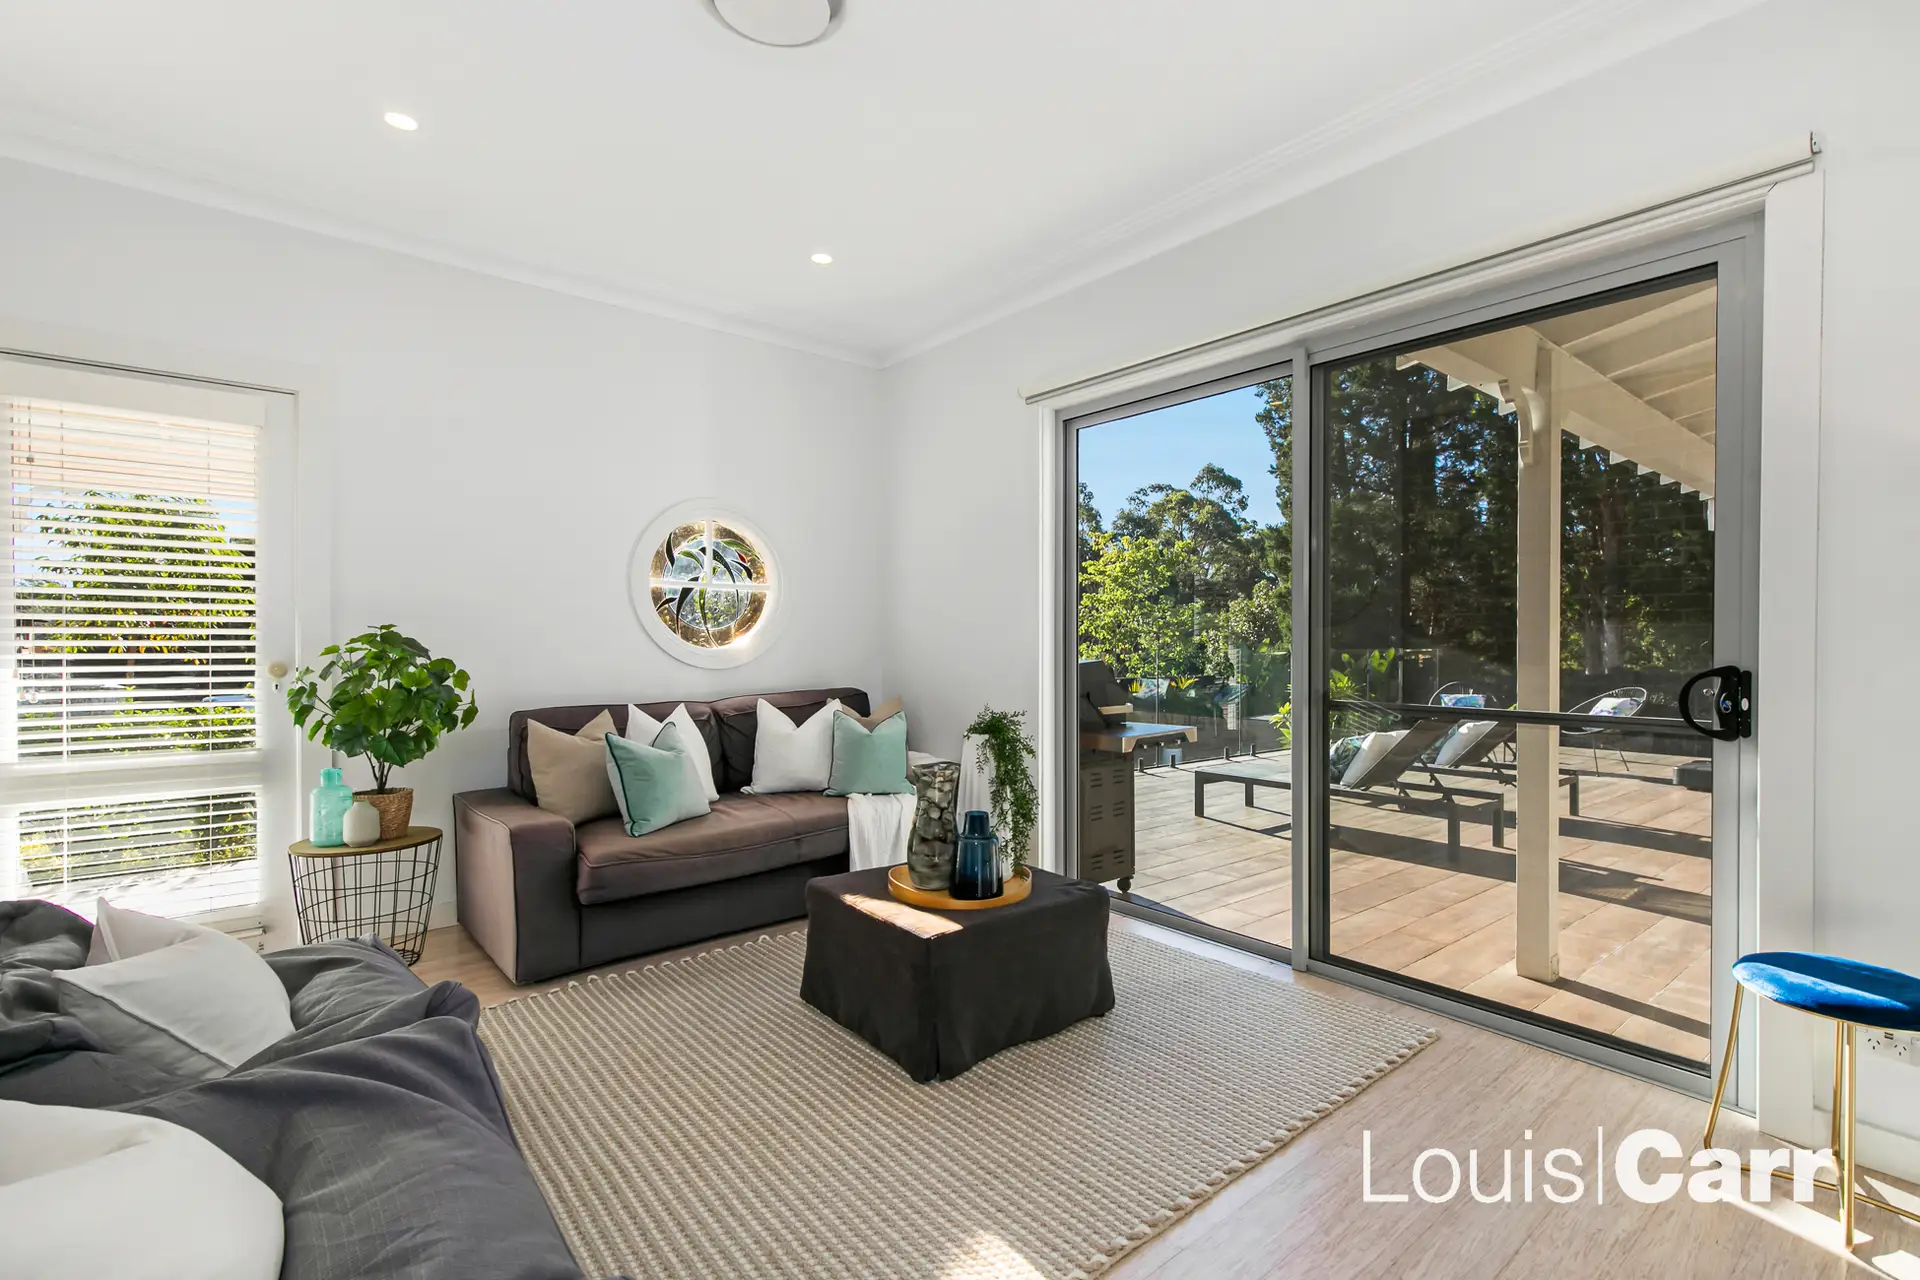 Photo #7: 216 Shepherds Drive, Cherrybrook - Sold by Louis Carr Real Estate